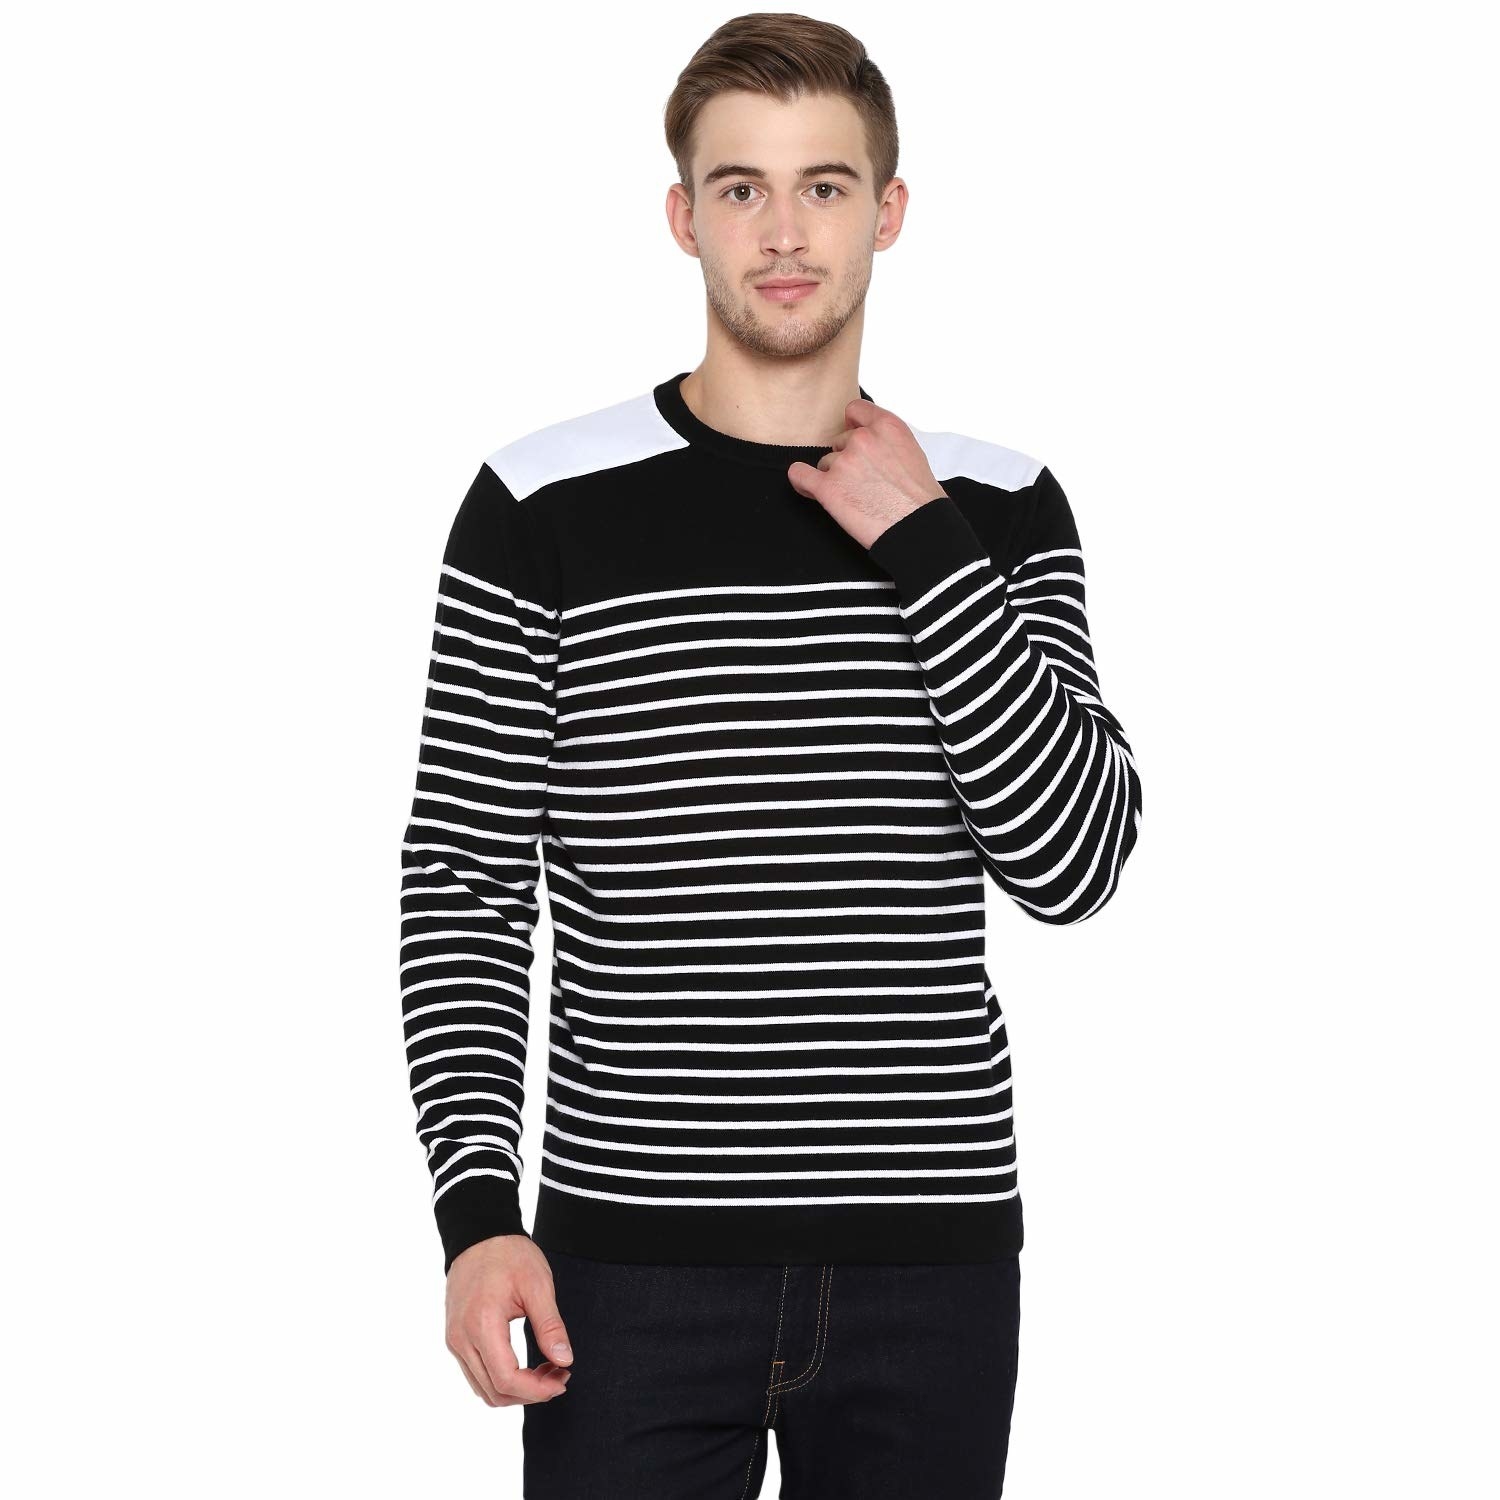 A model wearing a black sweater with white stripes and white patches on the shoulders.